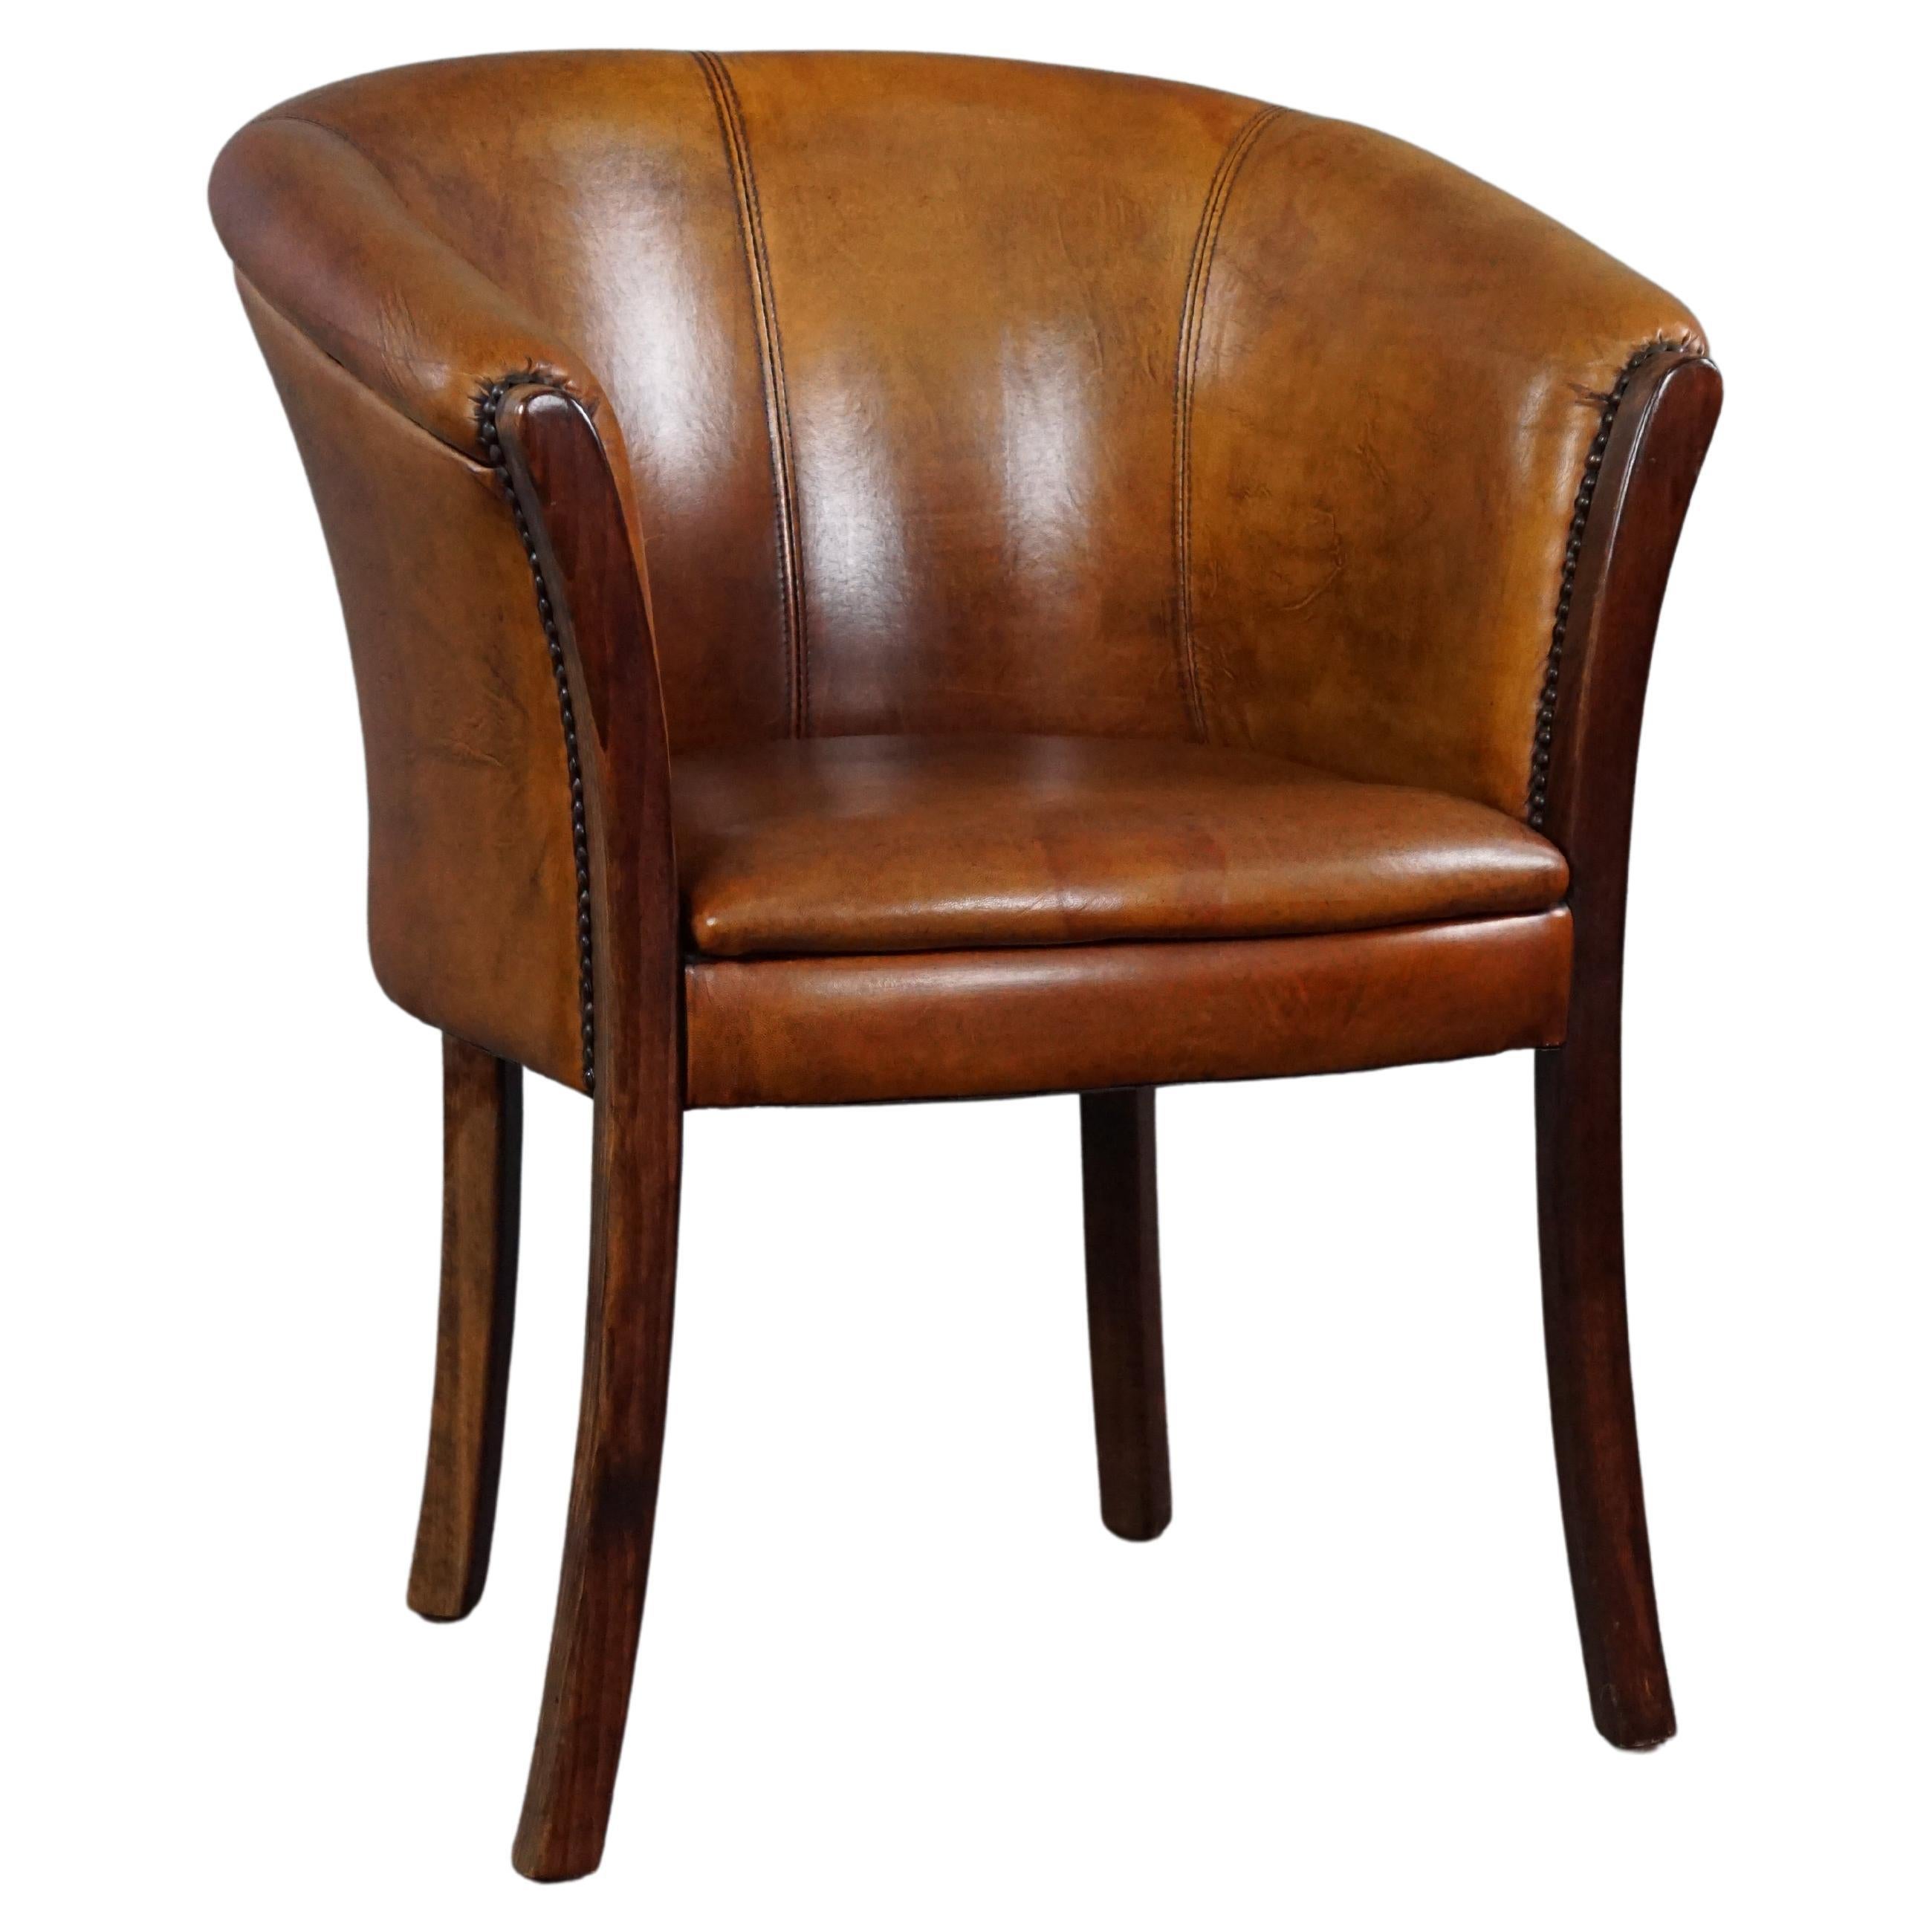 Very expressive side chair/tubchair made of sheep leather